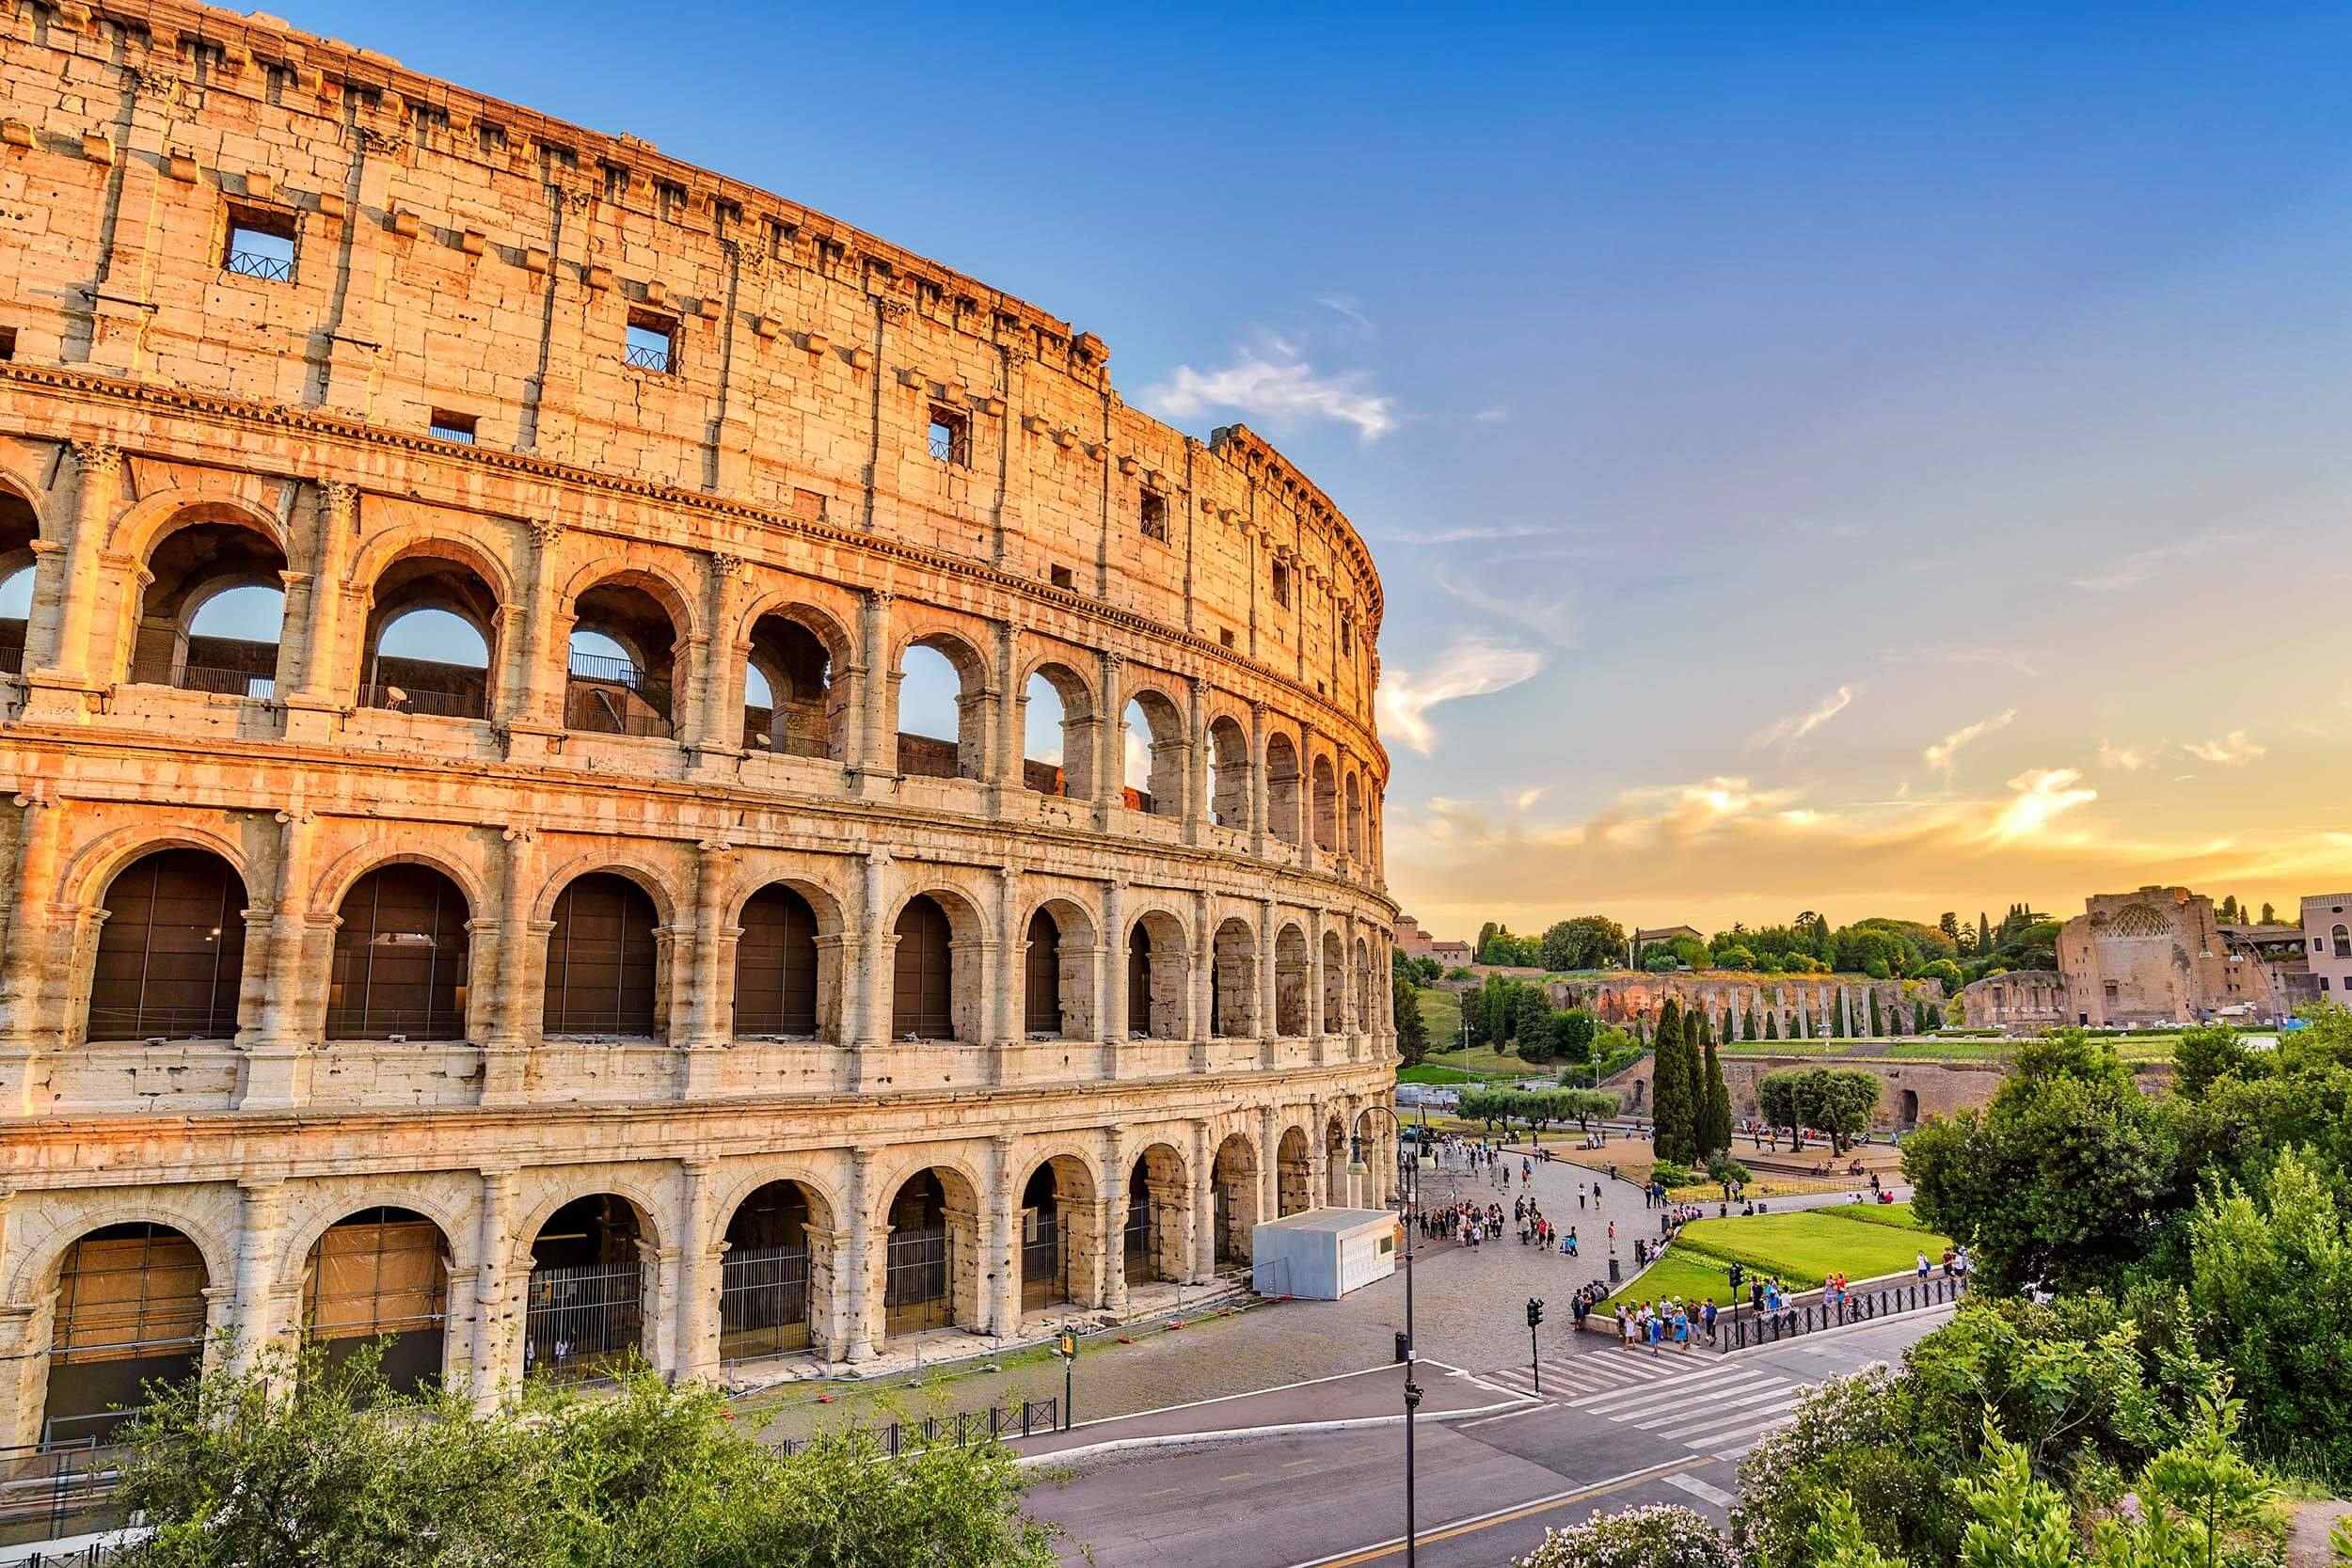 https://govacations.in/wp-content/uploads/2018/09/rome_01.jpg